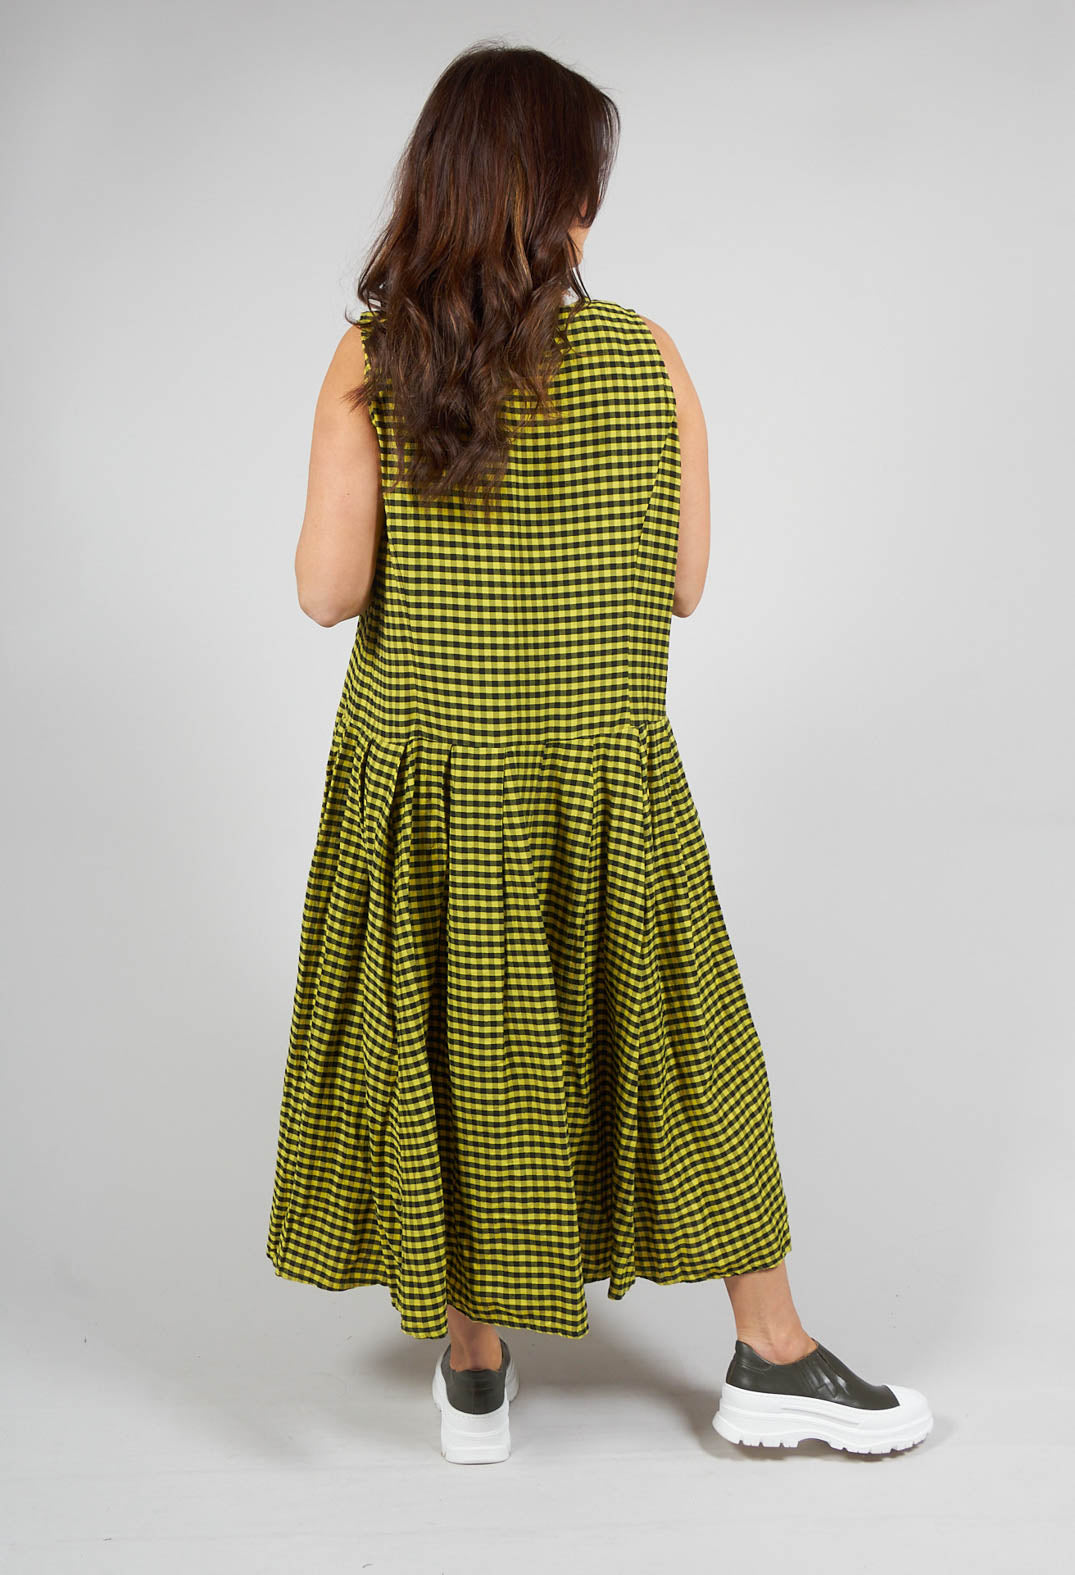 Herschneller Dress in Ingwer Yellow and Black Check